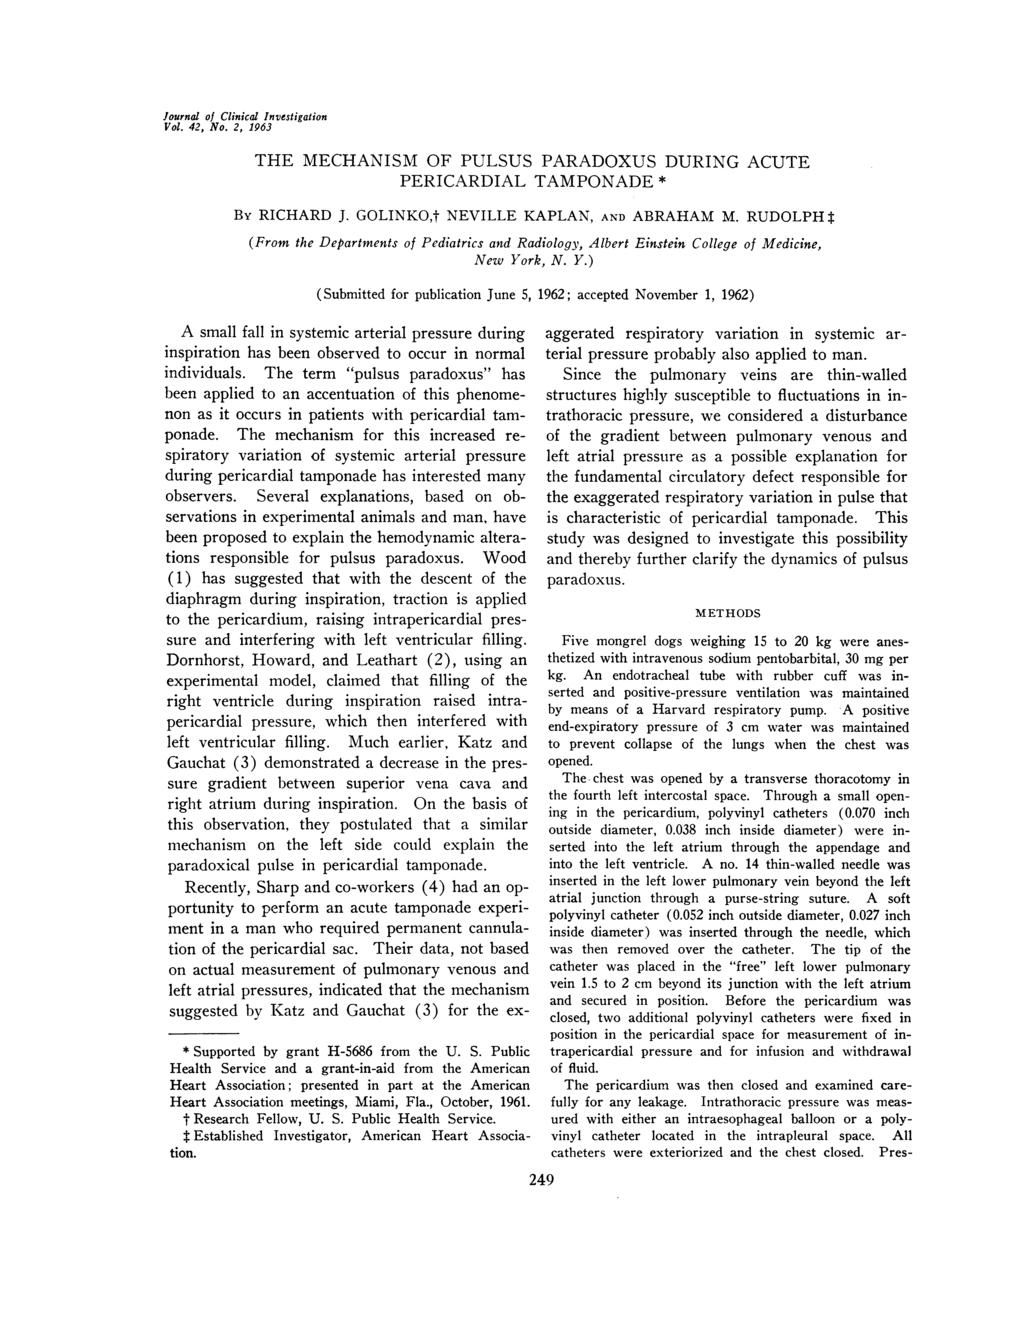 Journal of Clinical Investigation Vol. 42, No. 2, 1963 THE MECHANISM OF PULSUS PARADOXUS DURING ACUTE PERICARDIAL TAMPONADE * By RICHARD J. GOLINKO,t NEVILLE KAPLAN, AND ABRAHAM M.